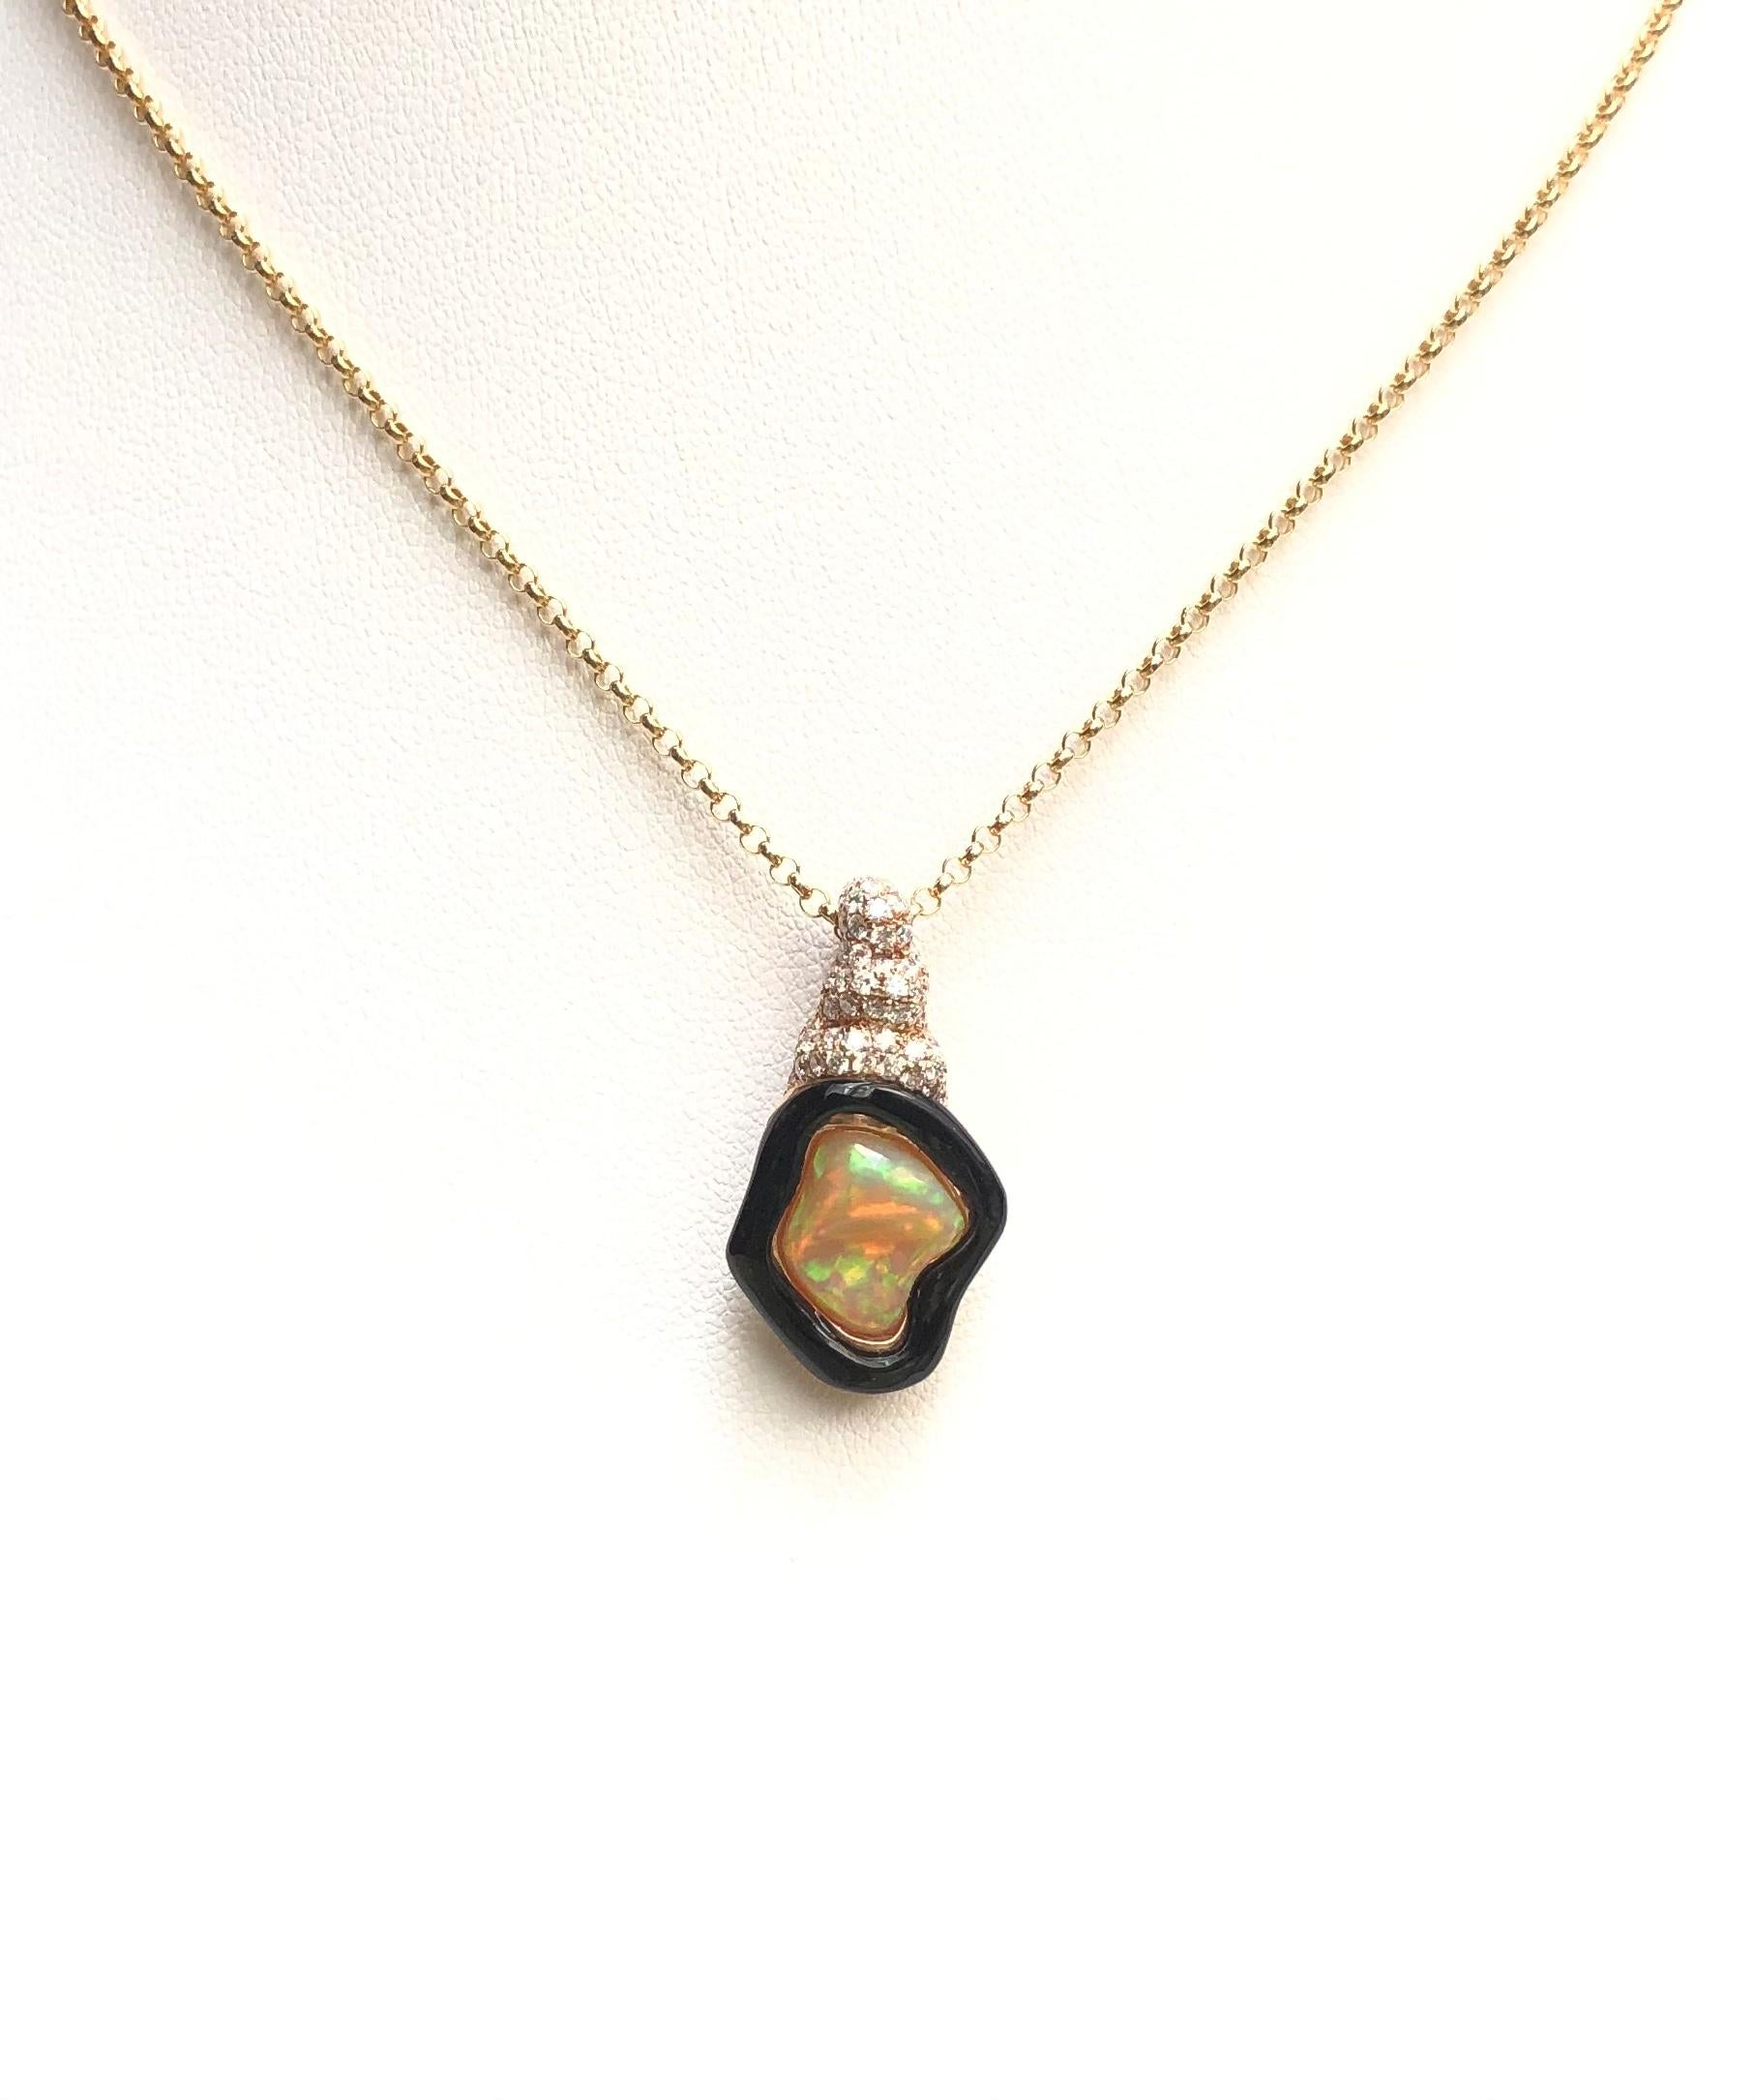 Opal 2.65 carats, Onyx with Diamond 0.55 carat Pendant set in 18 Karat Rose Gold Settings
(chain not included)

Width: 1.6 cm 
Length: 2.8 cm
Total Weight: 6.23 grams

